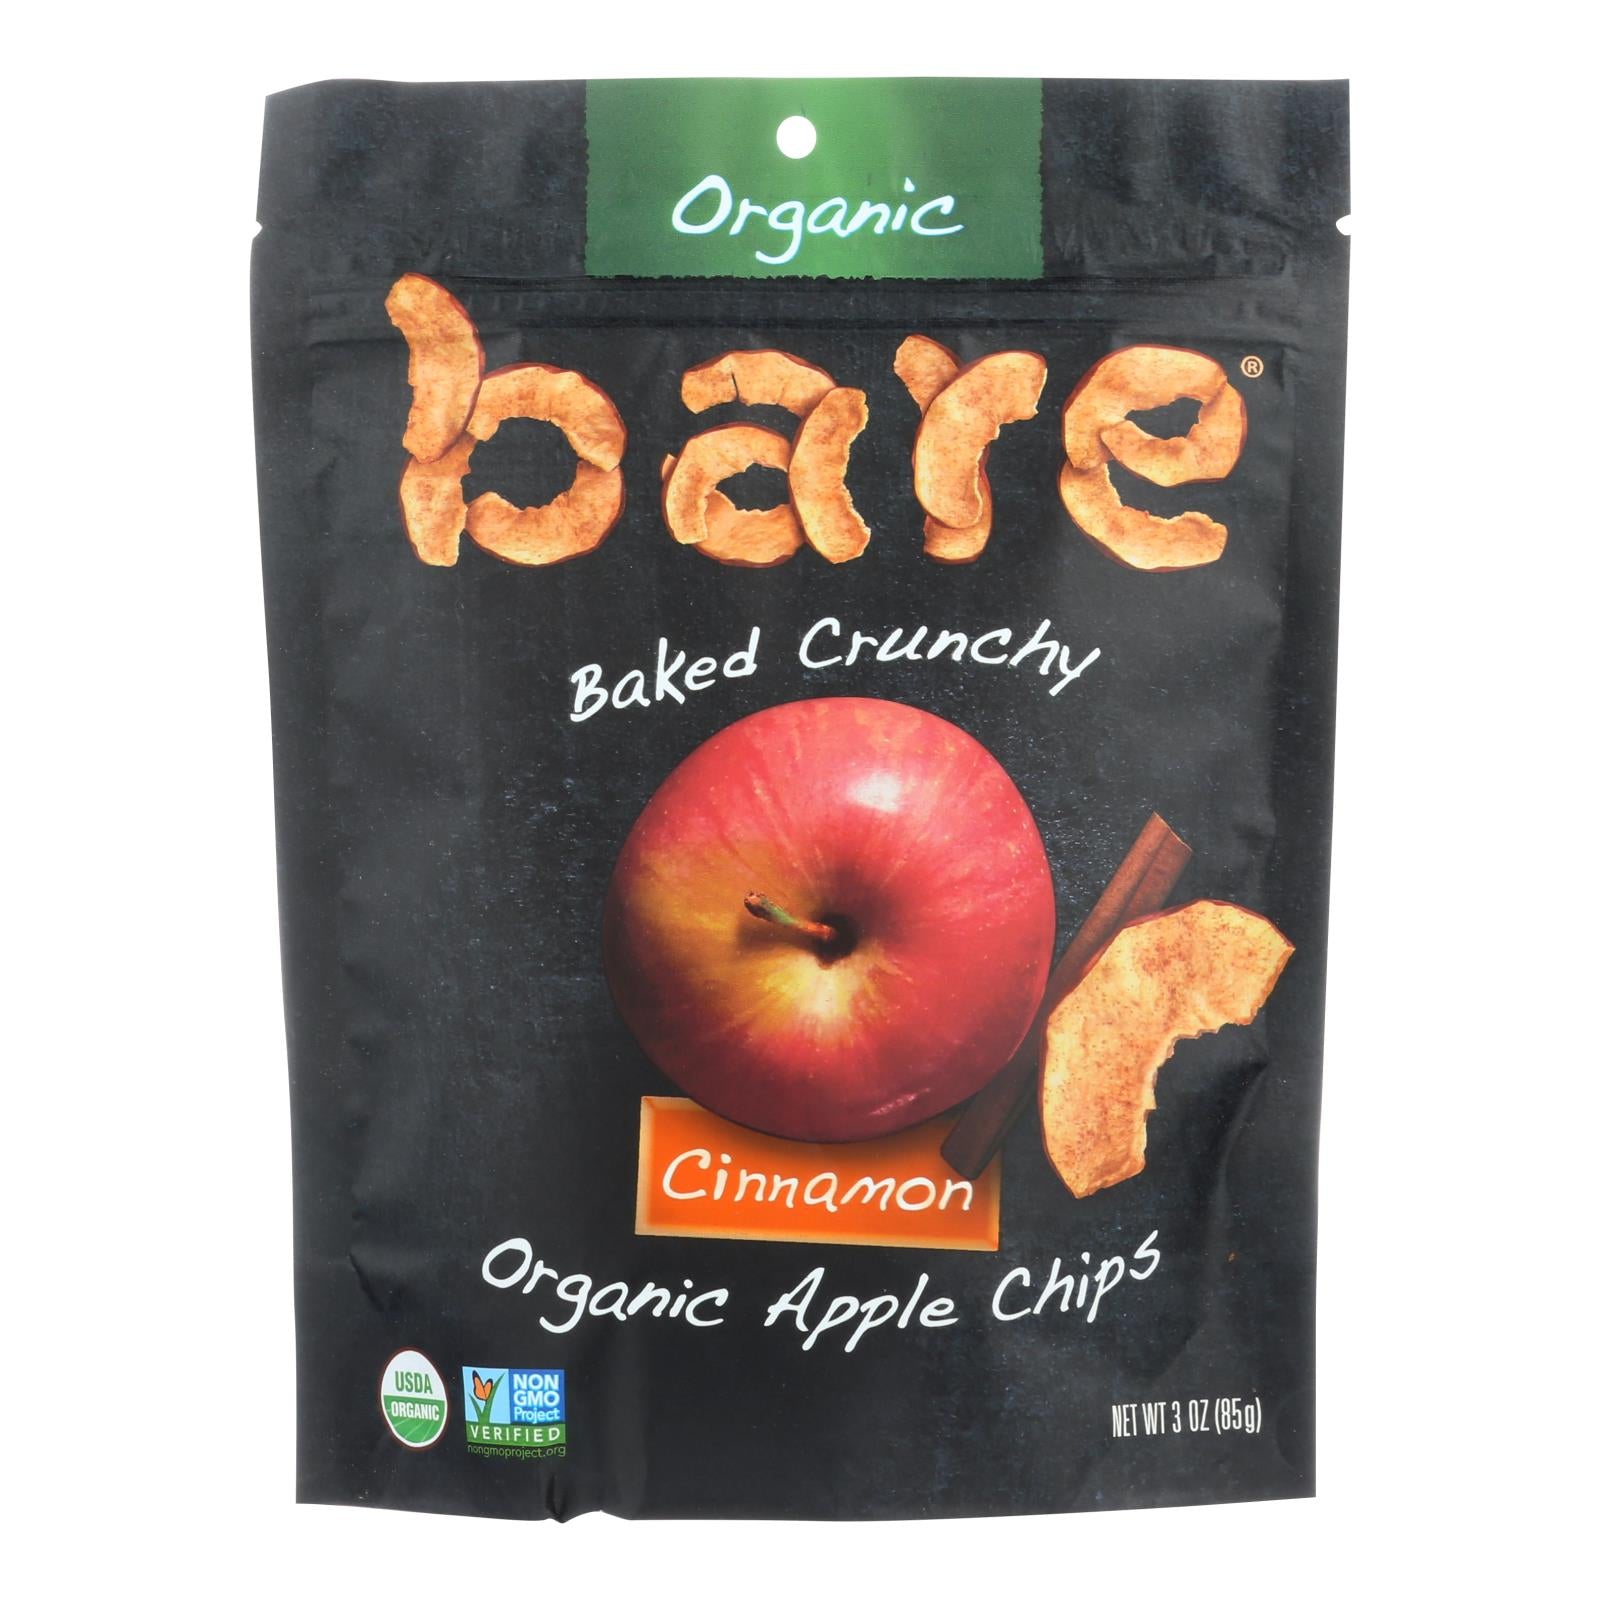 Bare Fruit, Bare Fruit Apple Chips - Organic - Crunchy - Simply Cinnamon - 3 oz - case of 12 (Pack of 12)